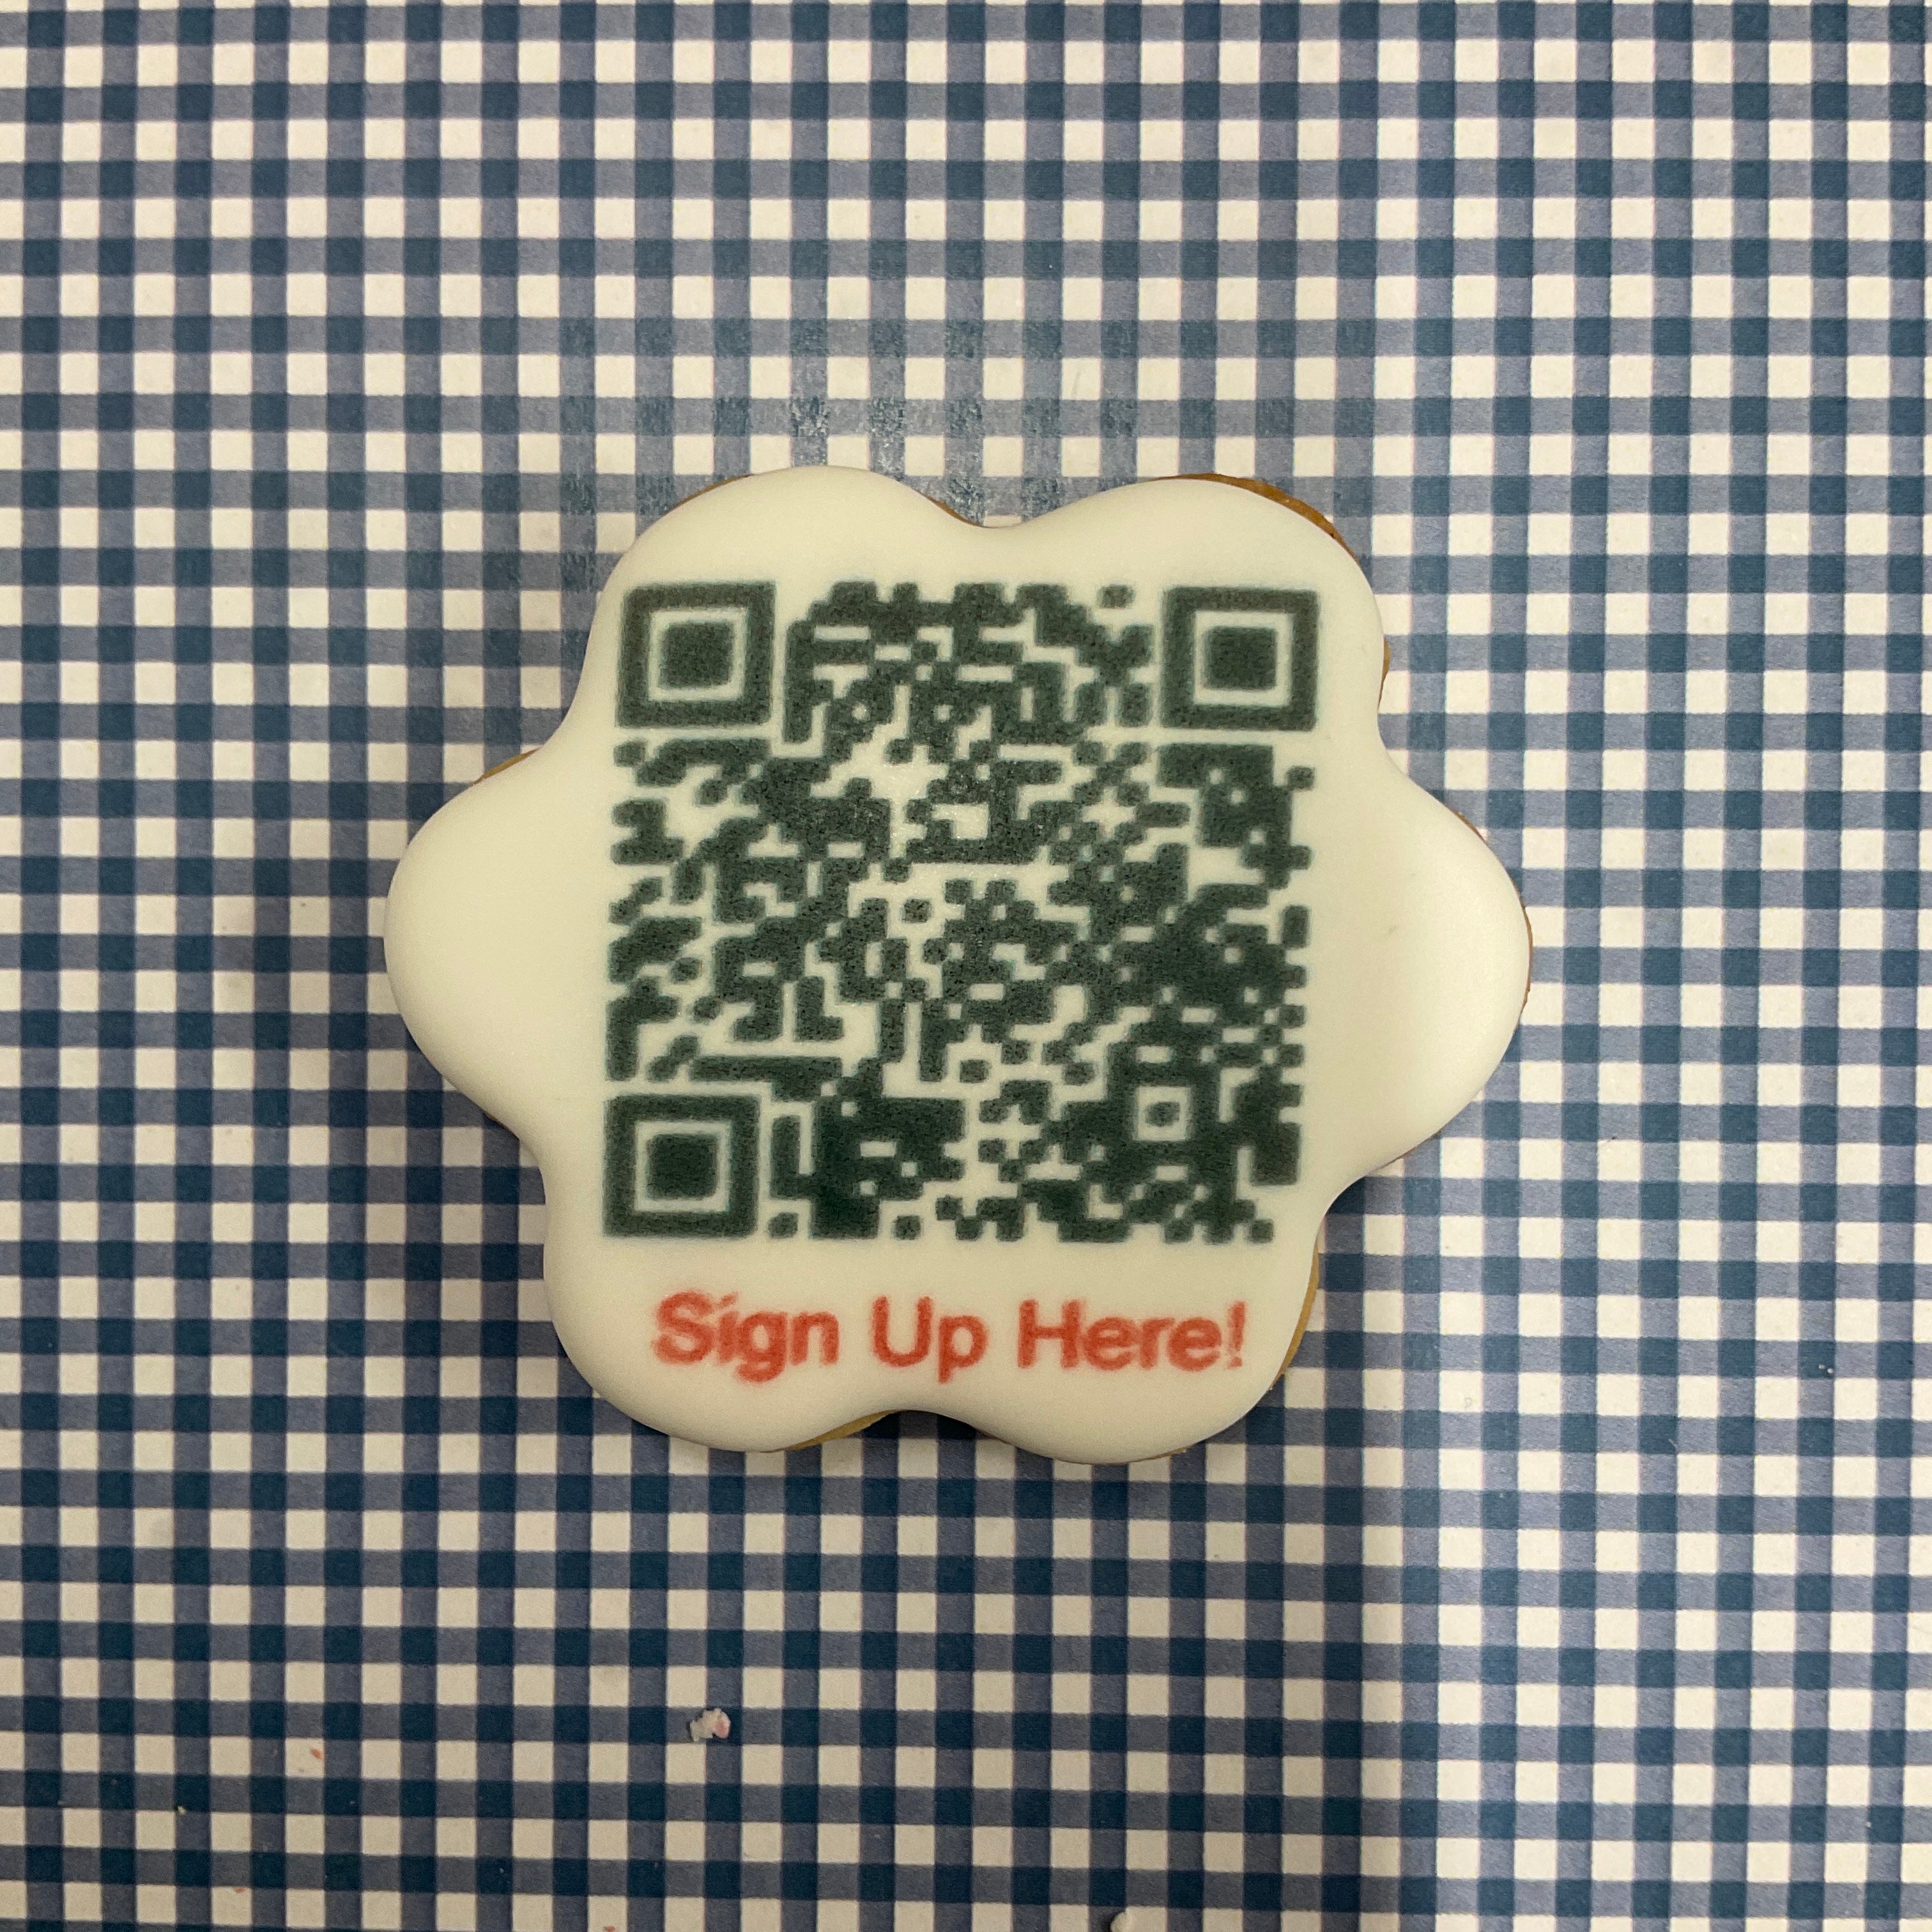 QR Code Cookie Campaign Corporate cookies